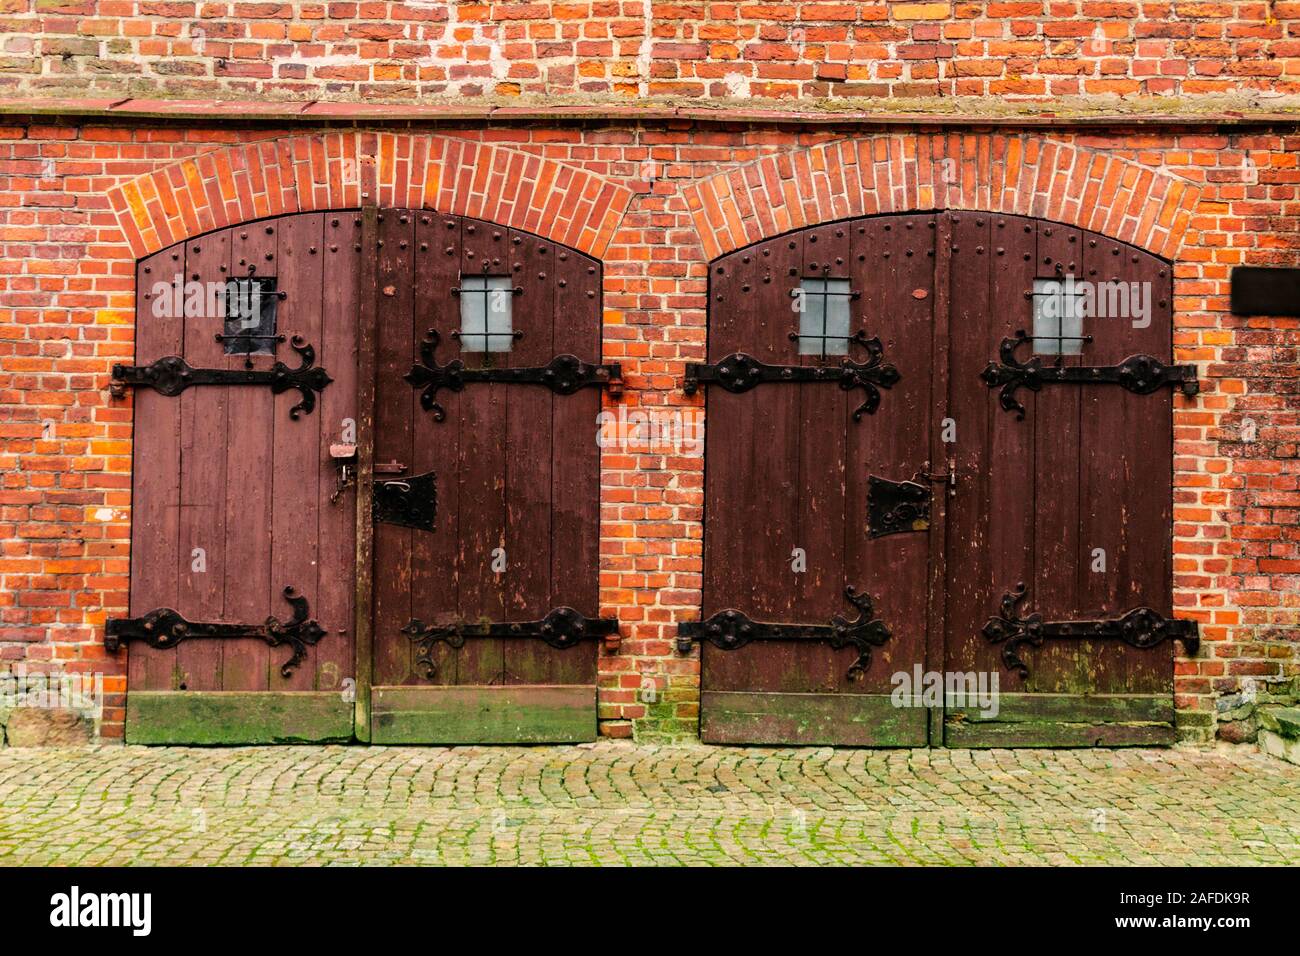 Close up image of a couple of wooden doors of a historical red brick building, with metal supports and locks, with moss on the wall and on the ground. Stock Photo